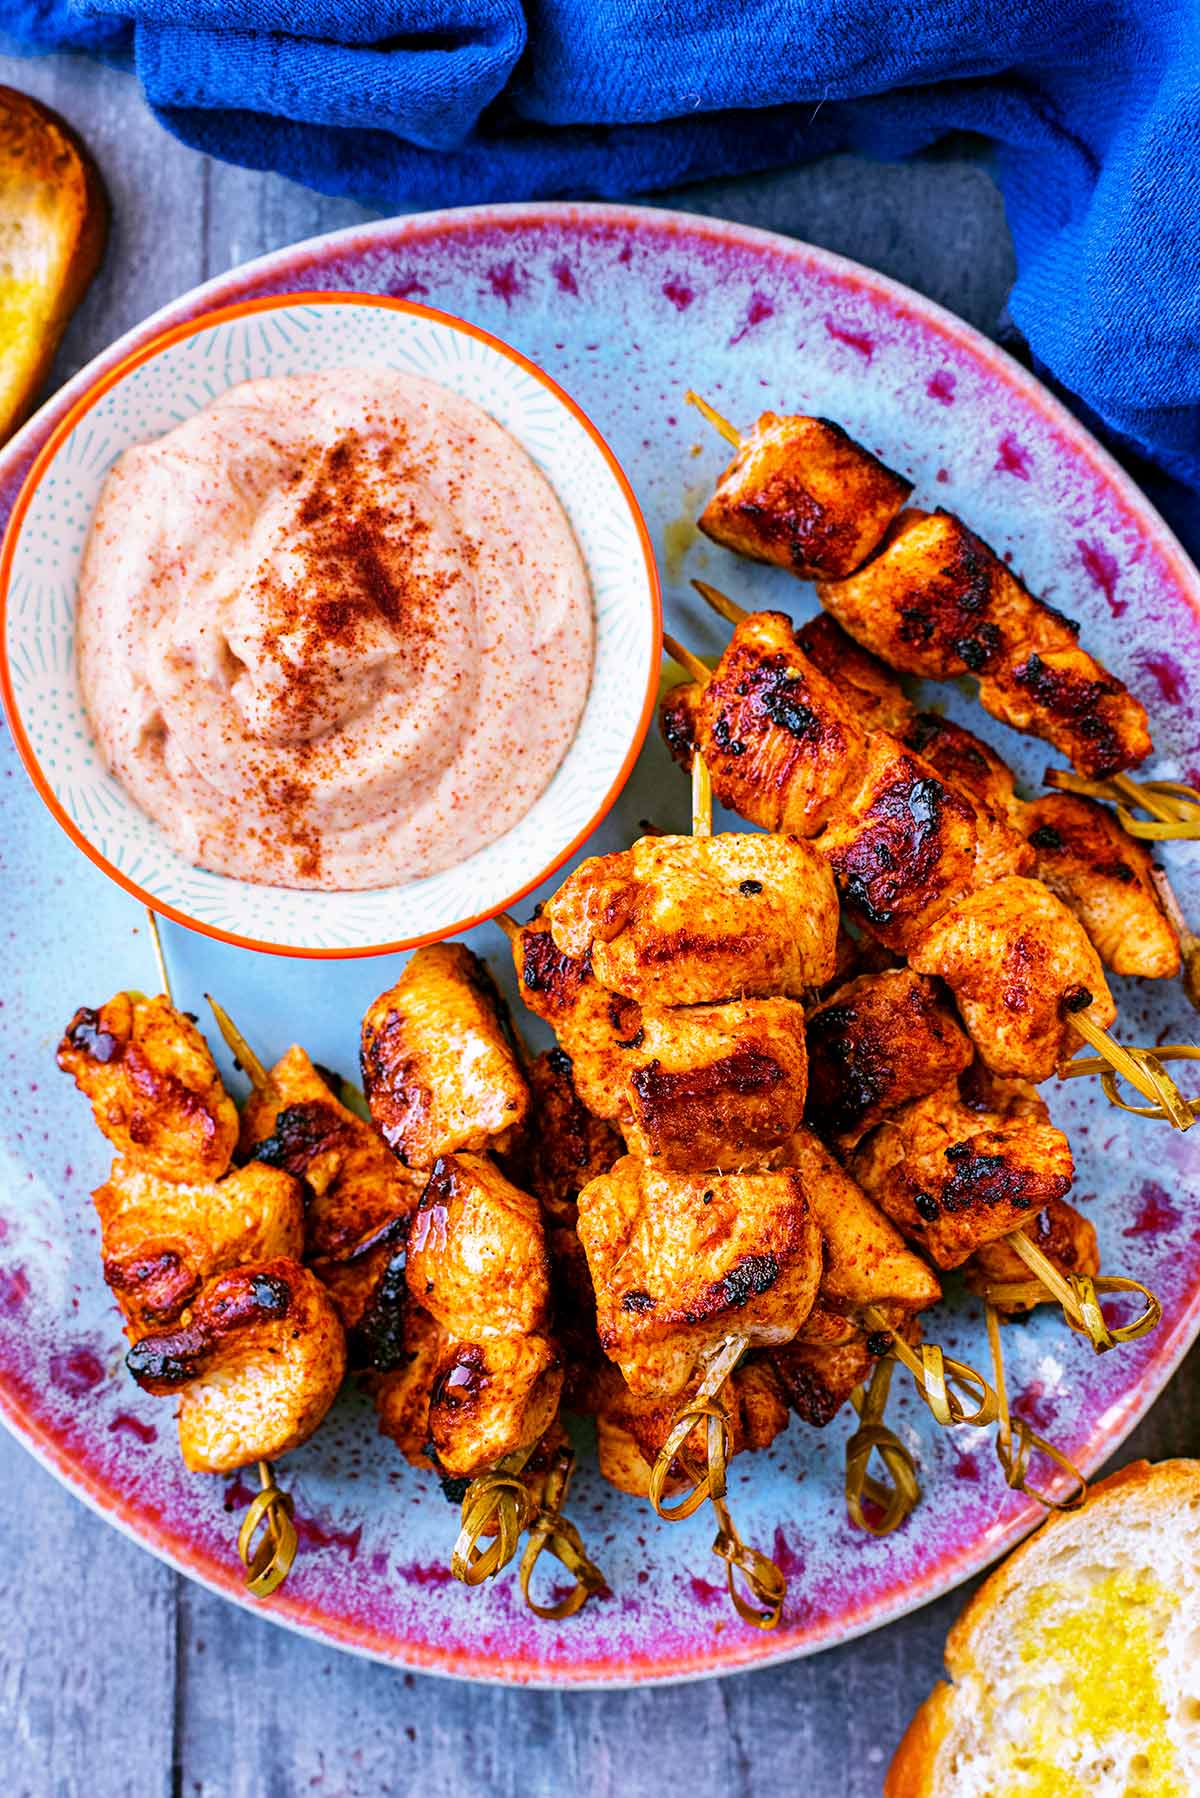 Paprika Chicken Skewers on a blue plate with a small dish of creamy dip.